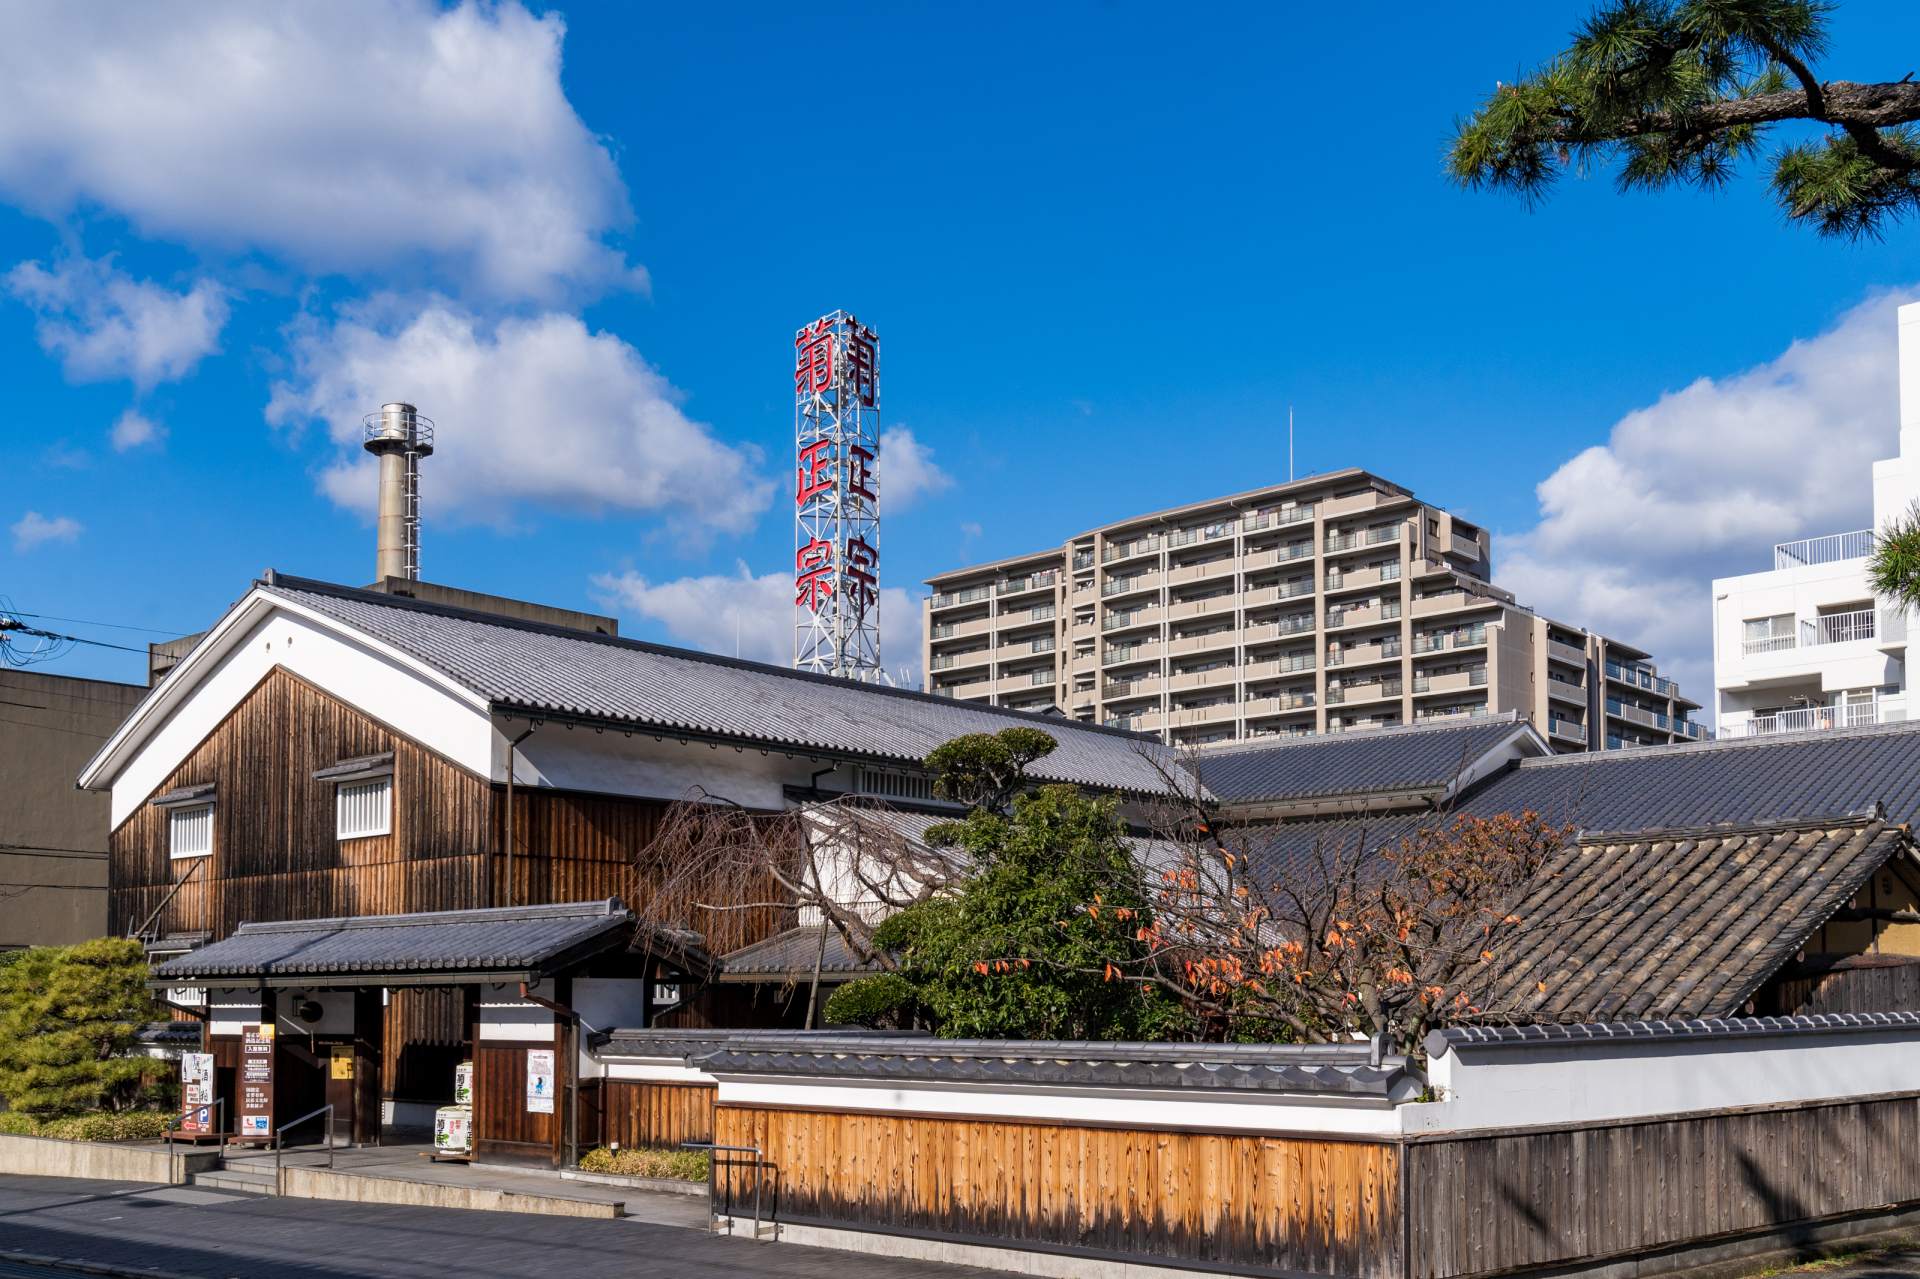 Amidst a modern skyline, sake breweries remain, telling the story of sake brewing history.